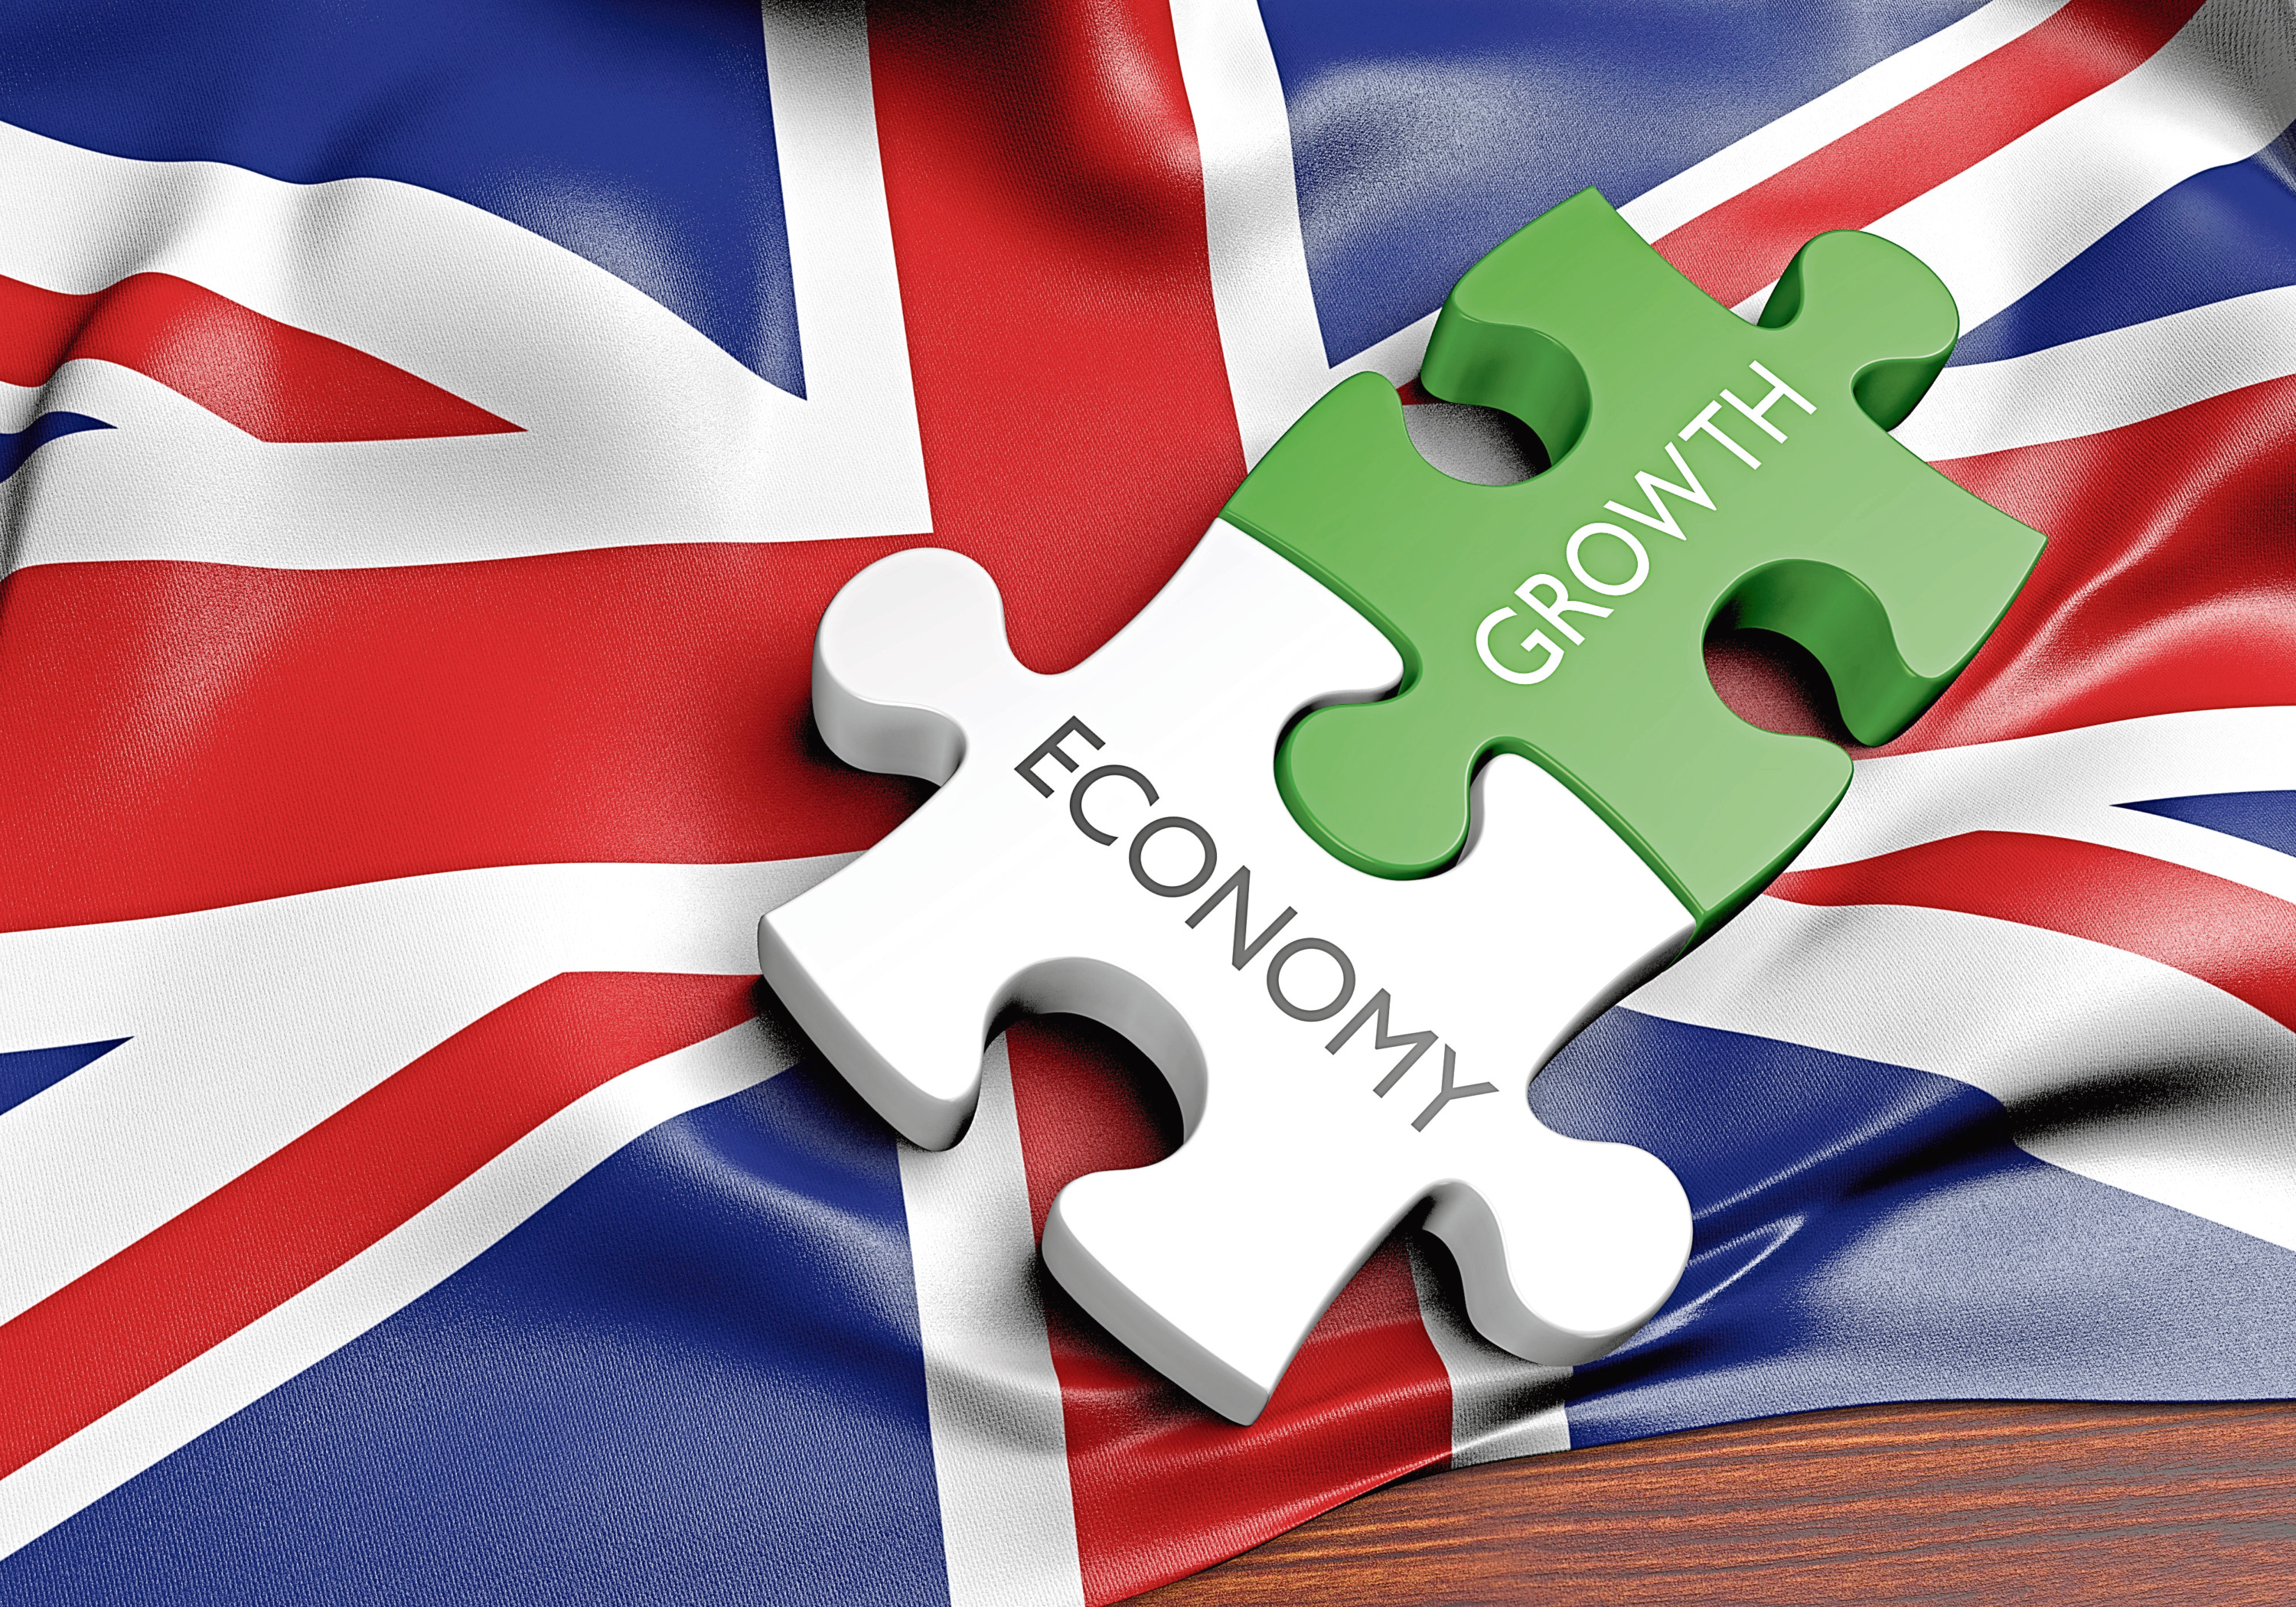 3D rendered concept of the state of the economic and finance markets in the United Kingdom.

United Kingdom economy and financial market growth concept. Stock image - keywords growth